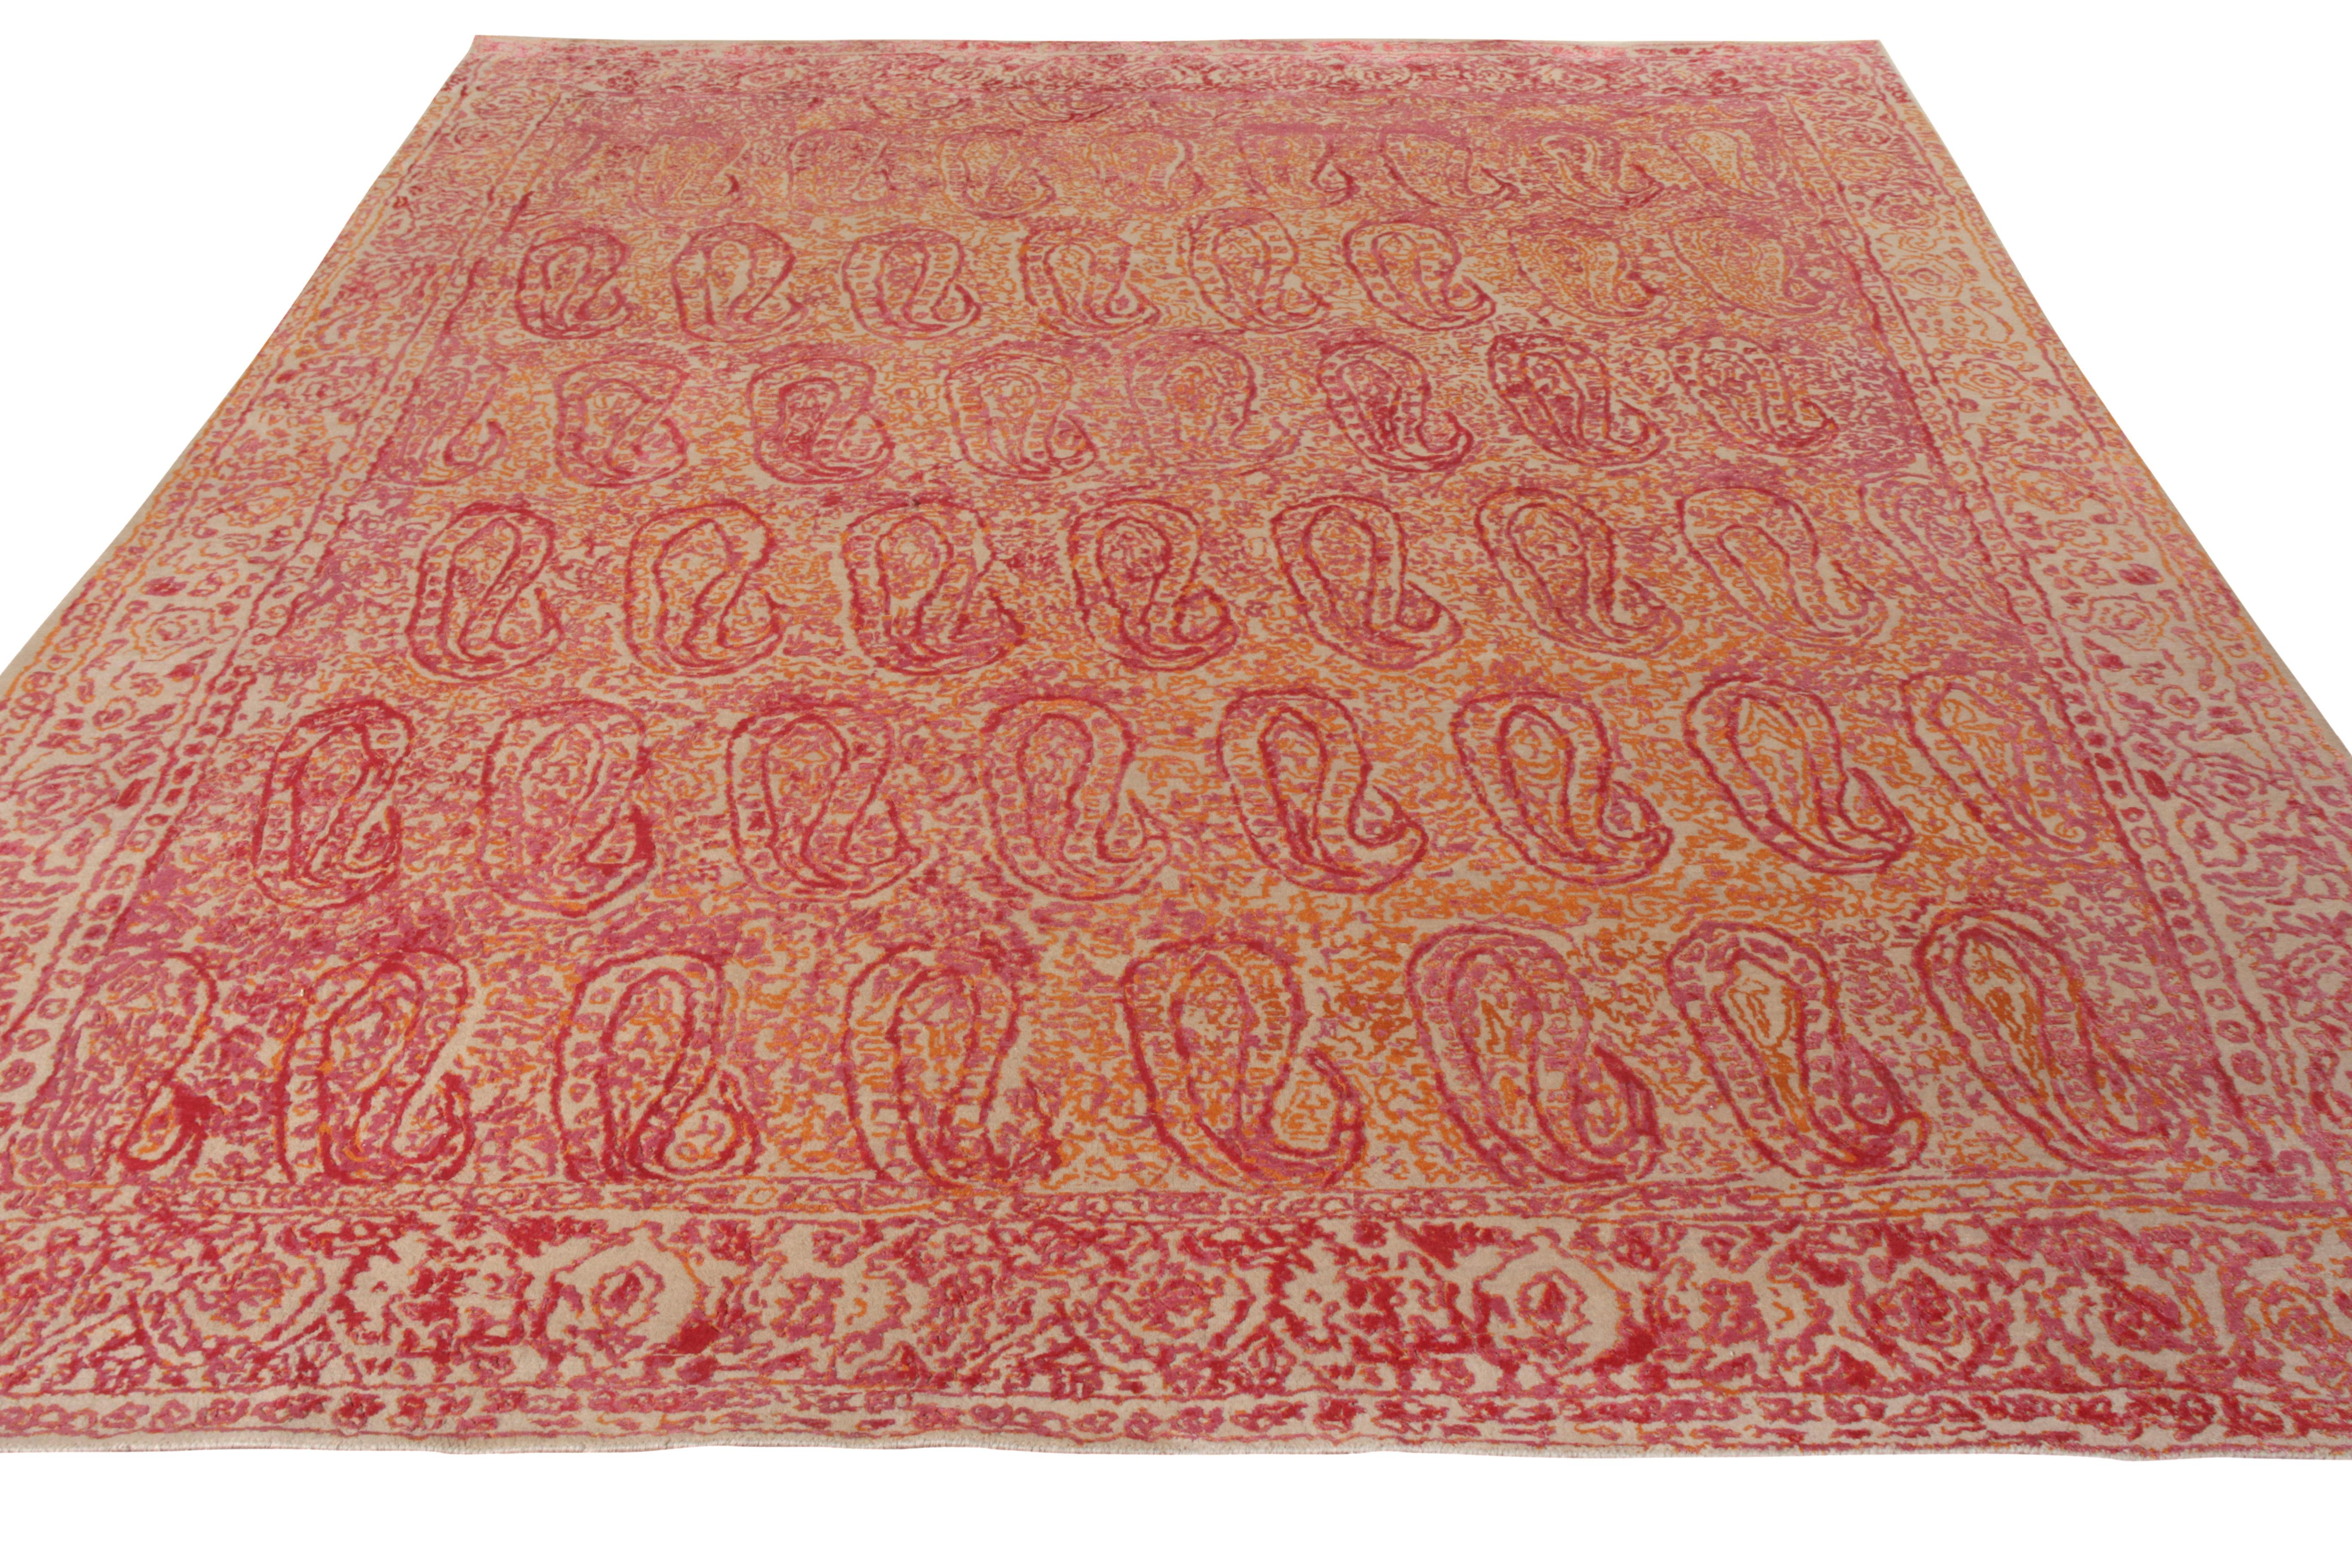 A scintillating 8x10 piece from Rug & Kilim’s Modern Classics Collection inspired by classic paisley patterns—historically revered as signifiers in the attempt to show off the skill of the weaver. Hand knotted in wool and silk, this contemporary